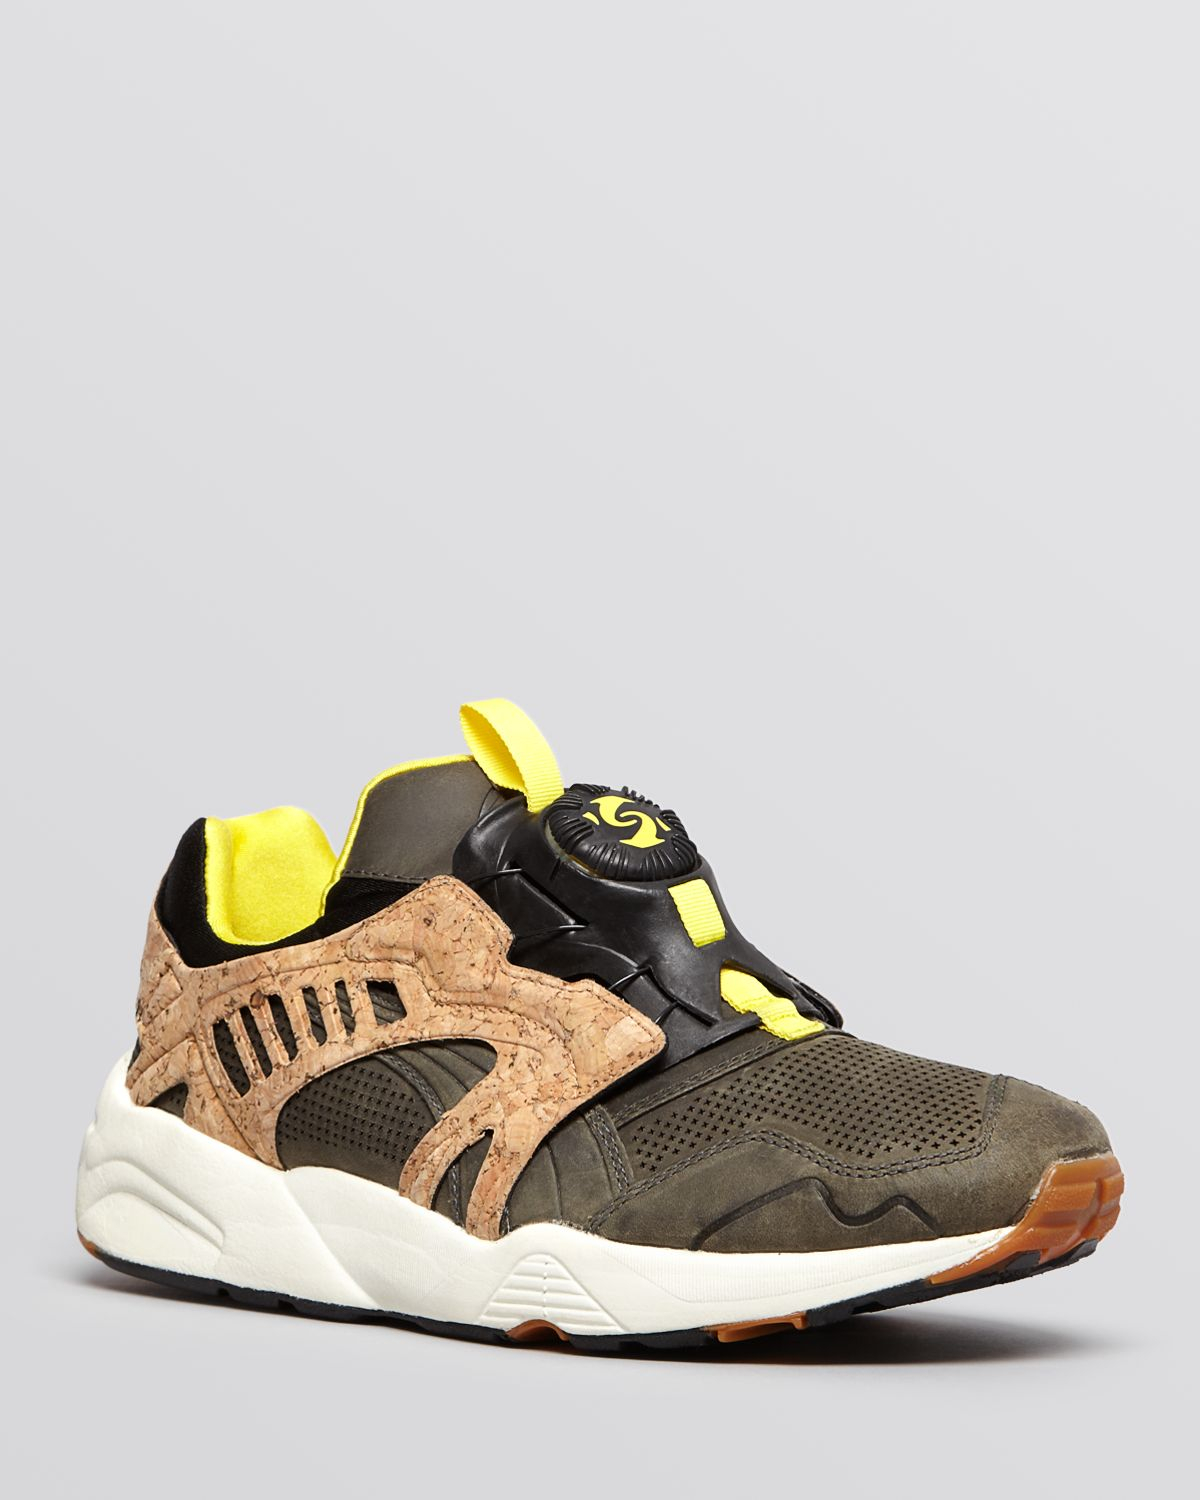 PUMA Leather Disc Cage Lux Cork Sneakers in Green for Men - Lyst